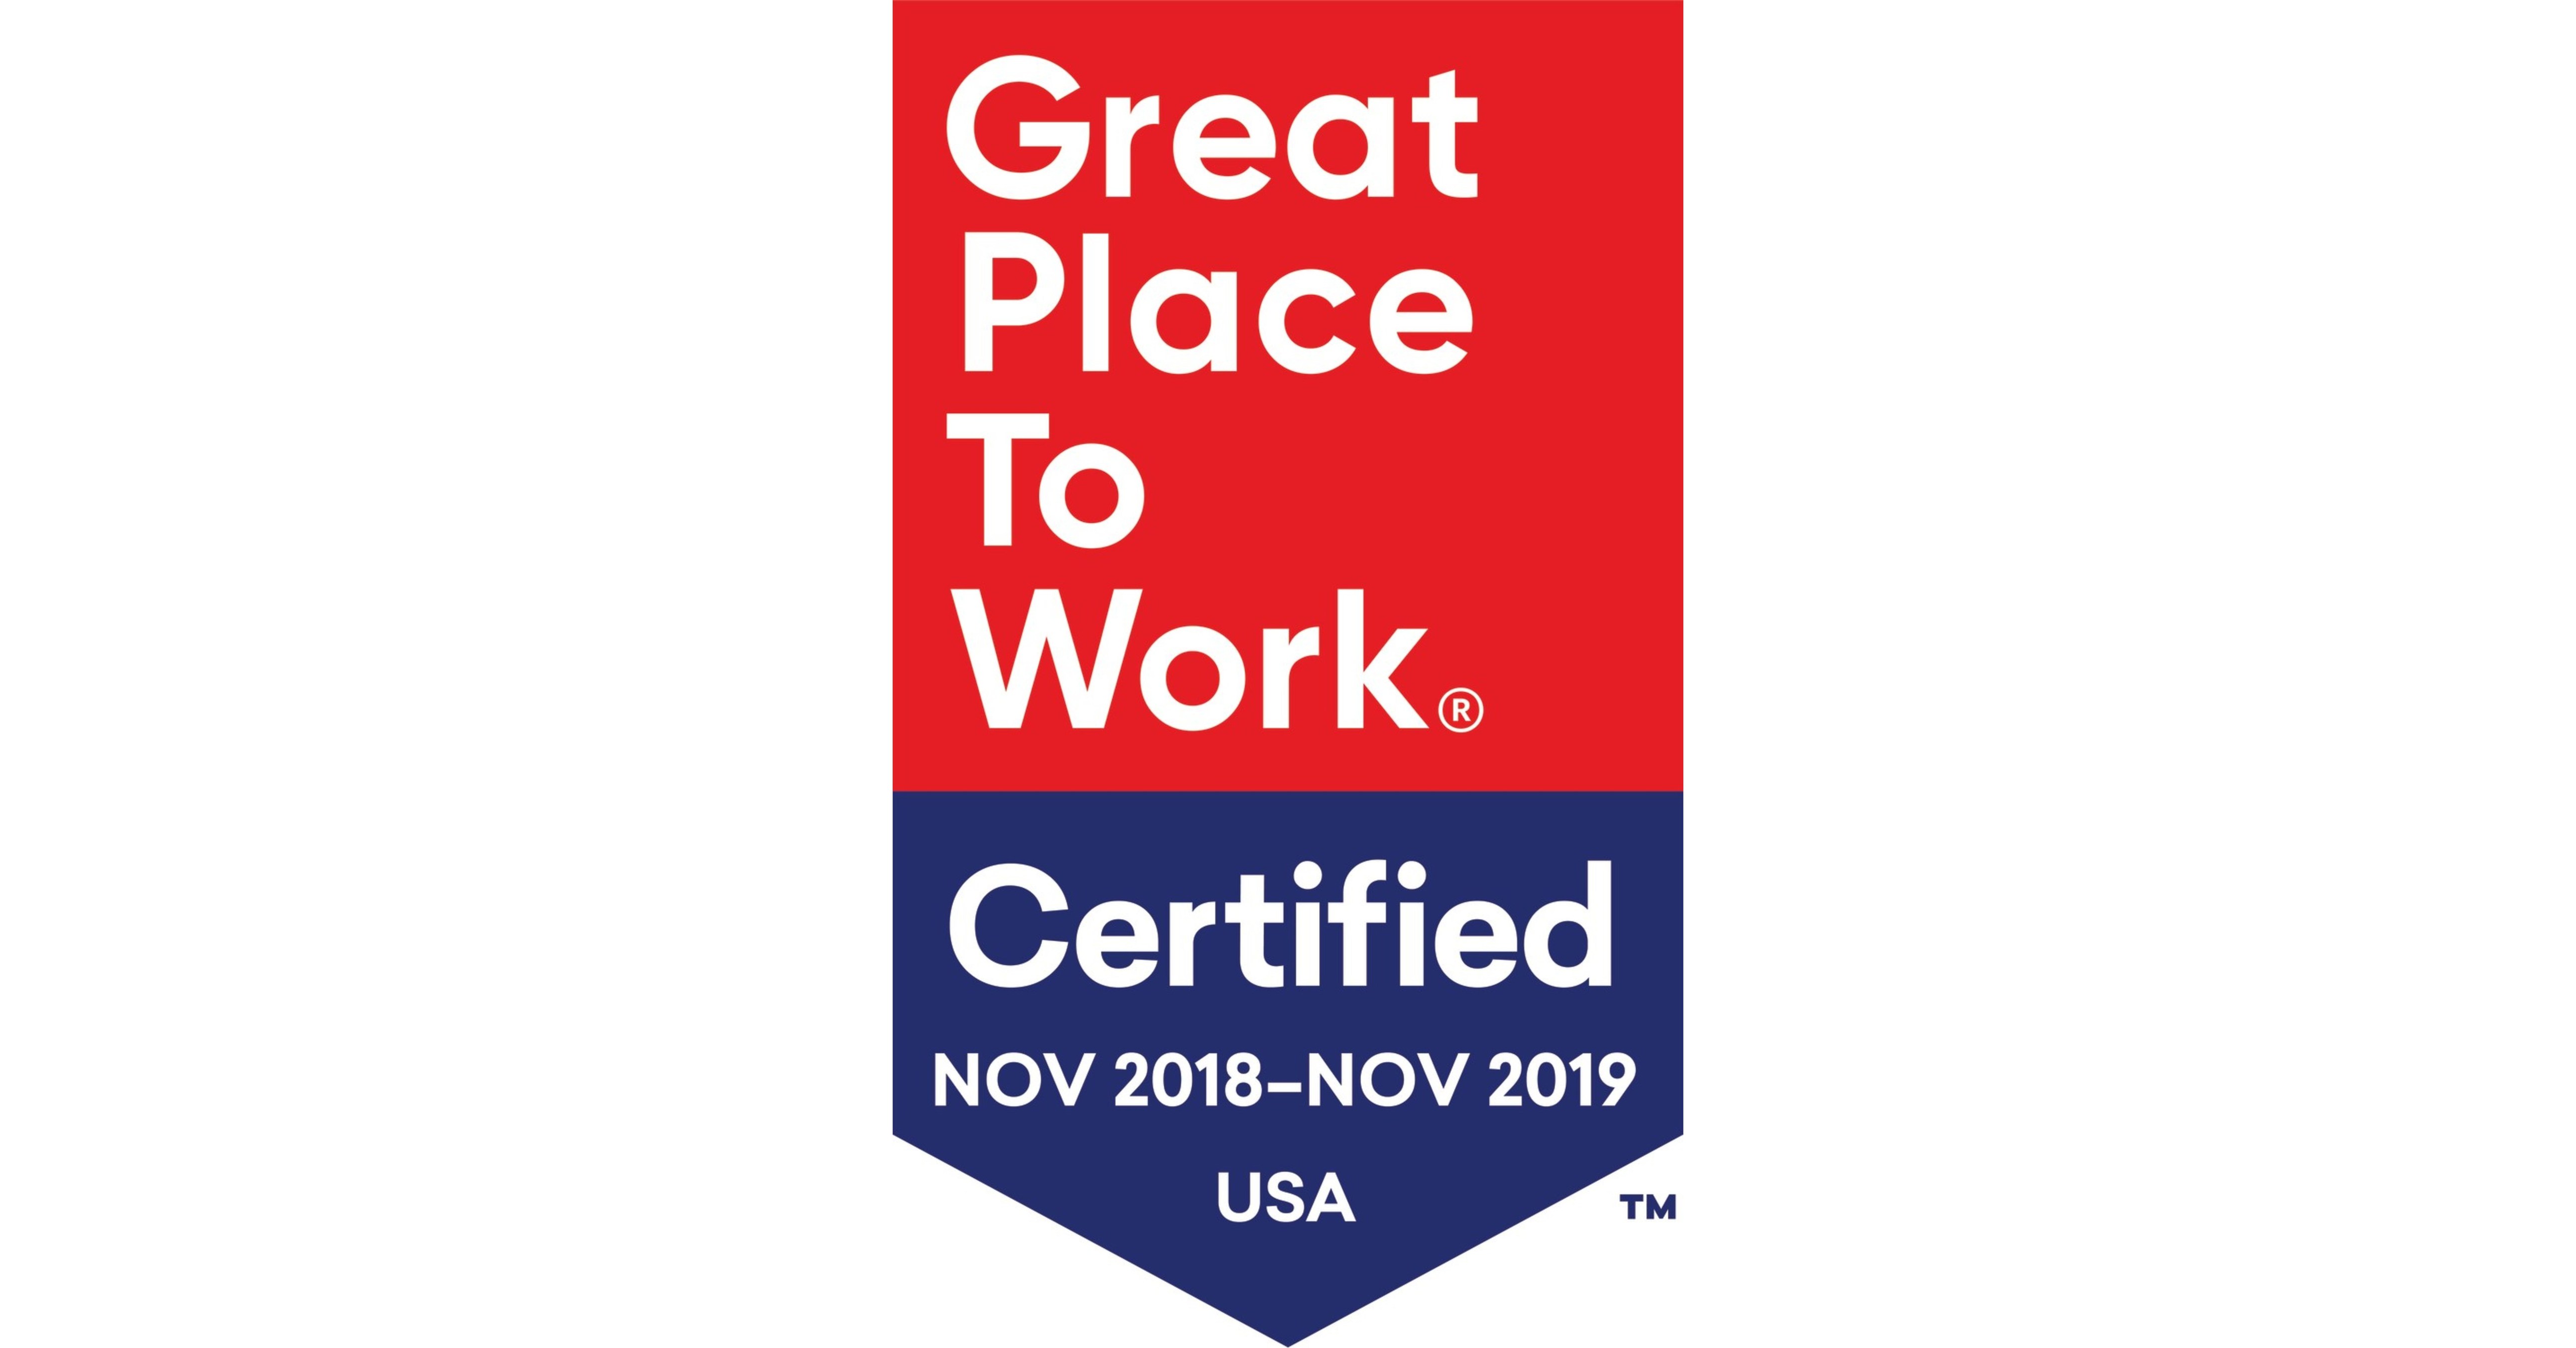 Reservations.com Achieves Great Place to Work Certification